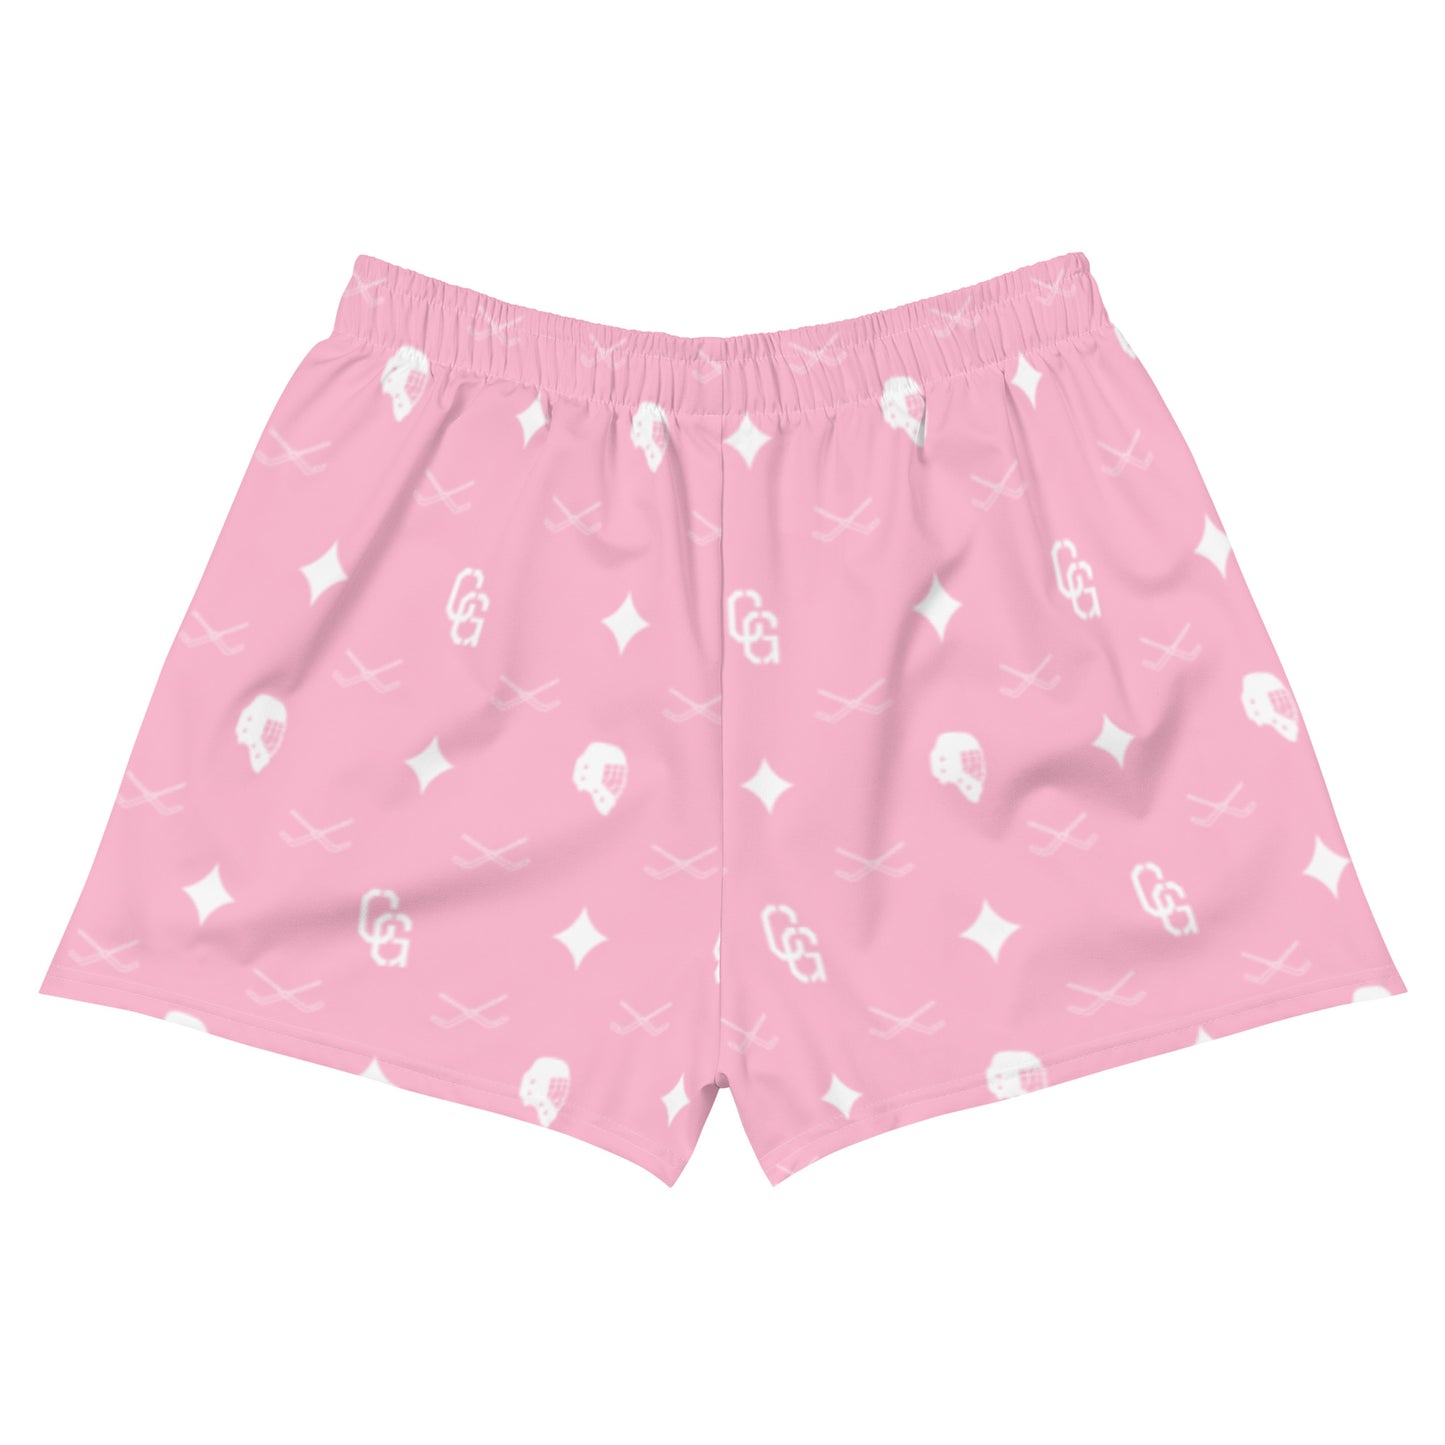 Women's Pink Lux Print Athletic Short Shorts